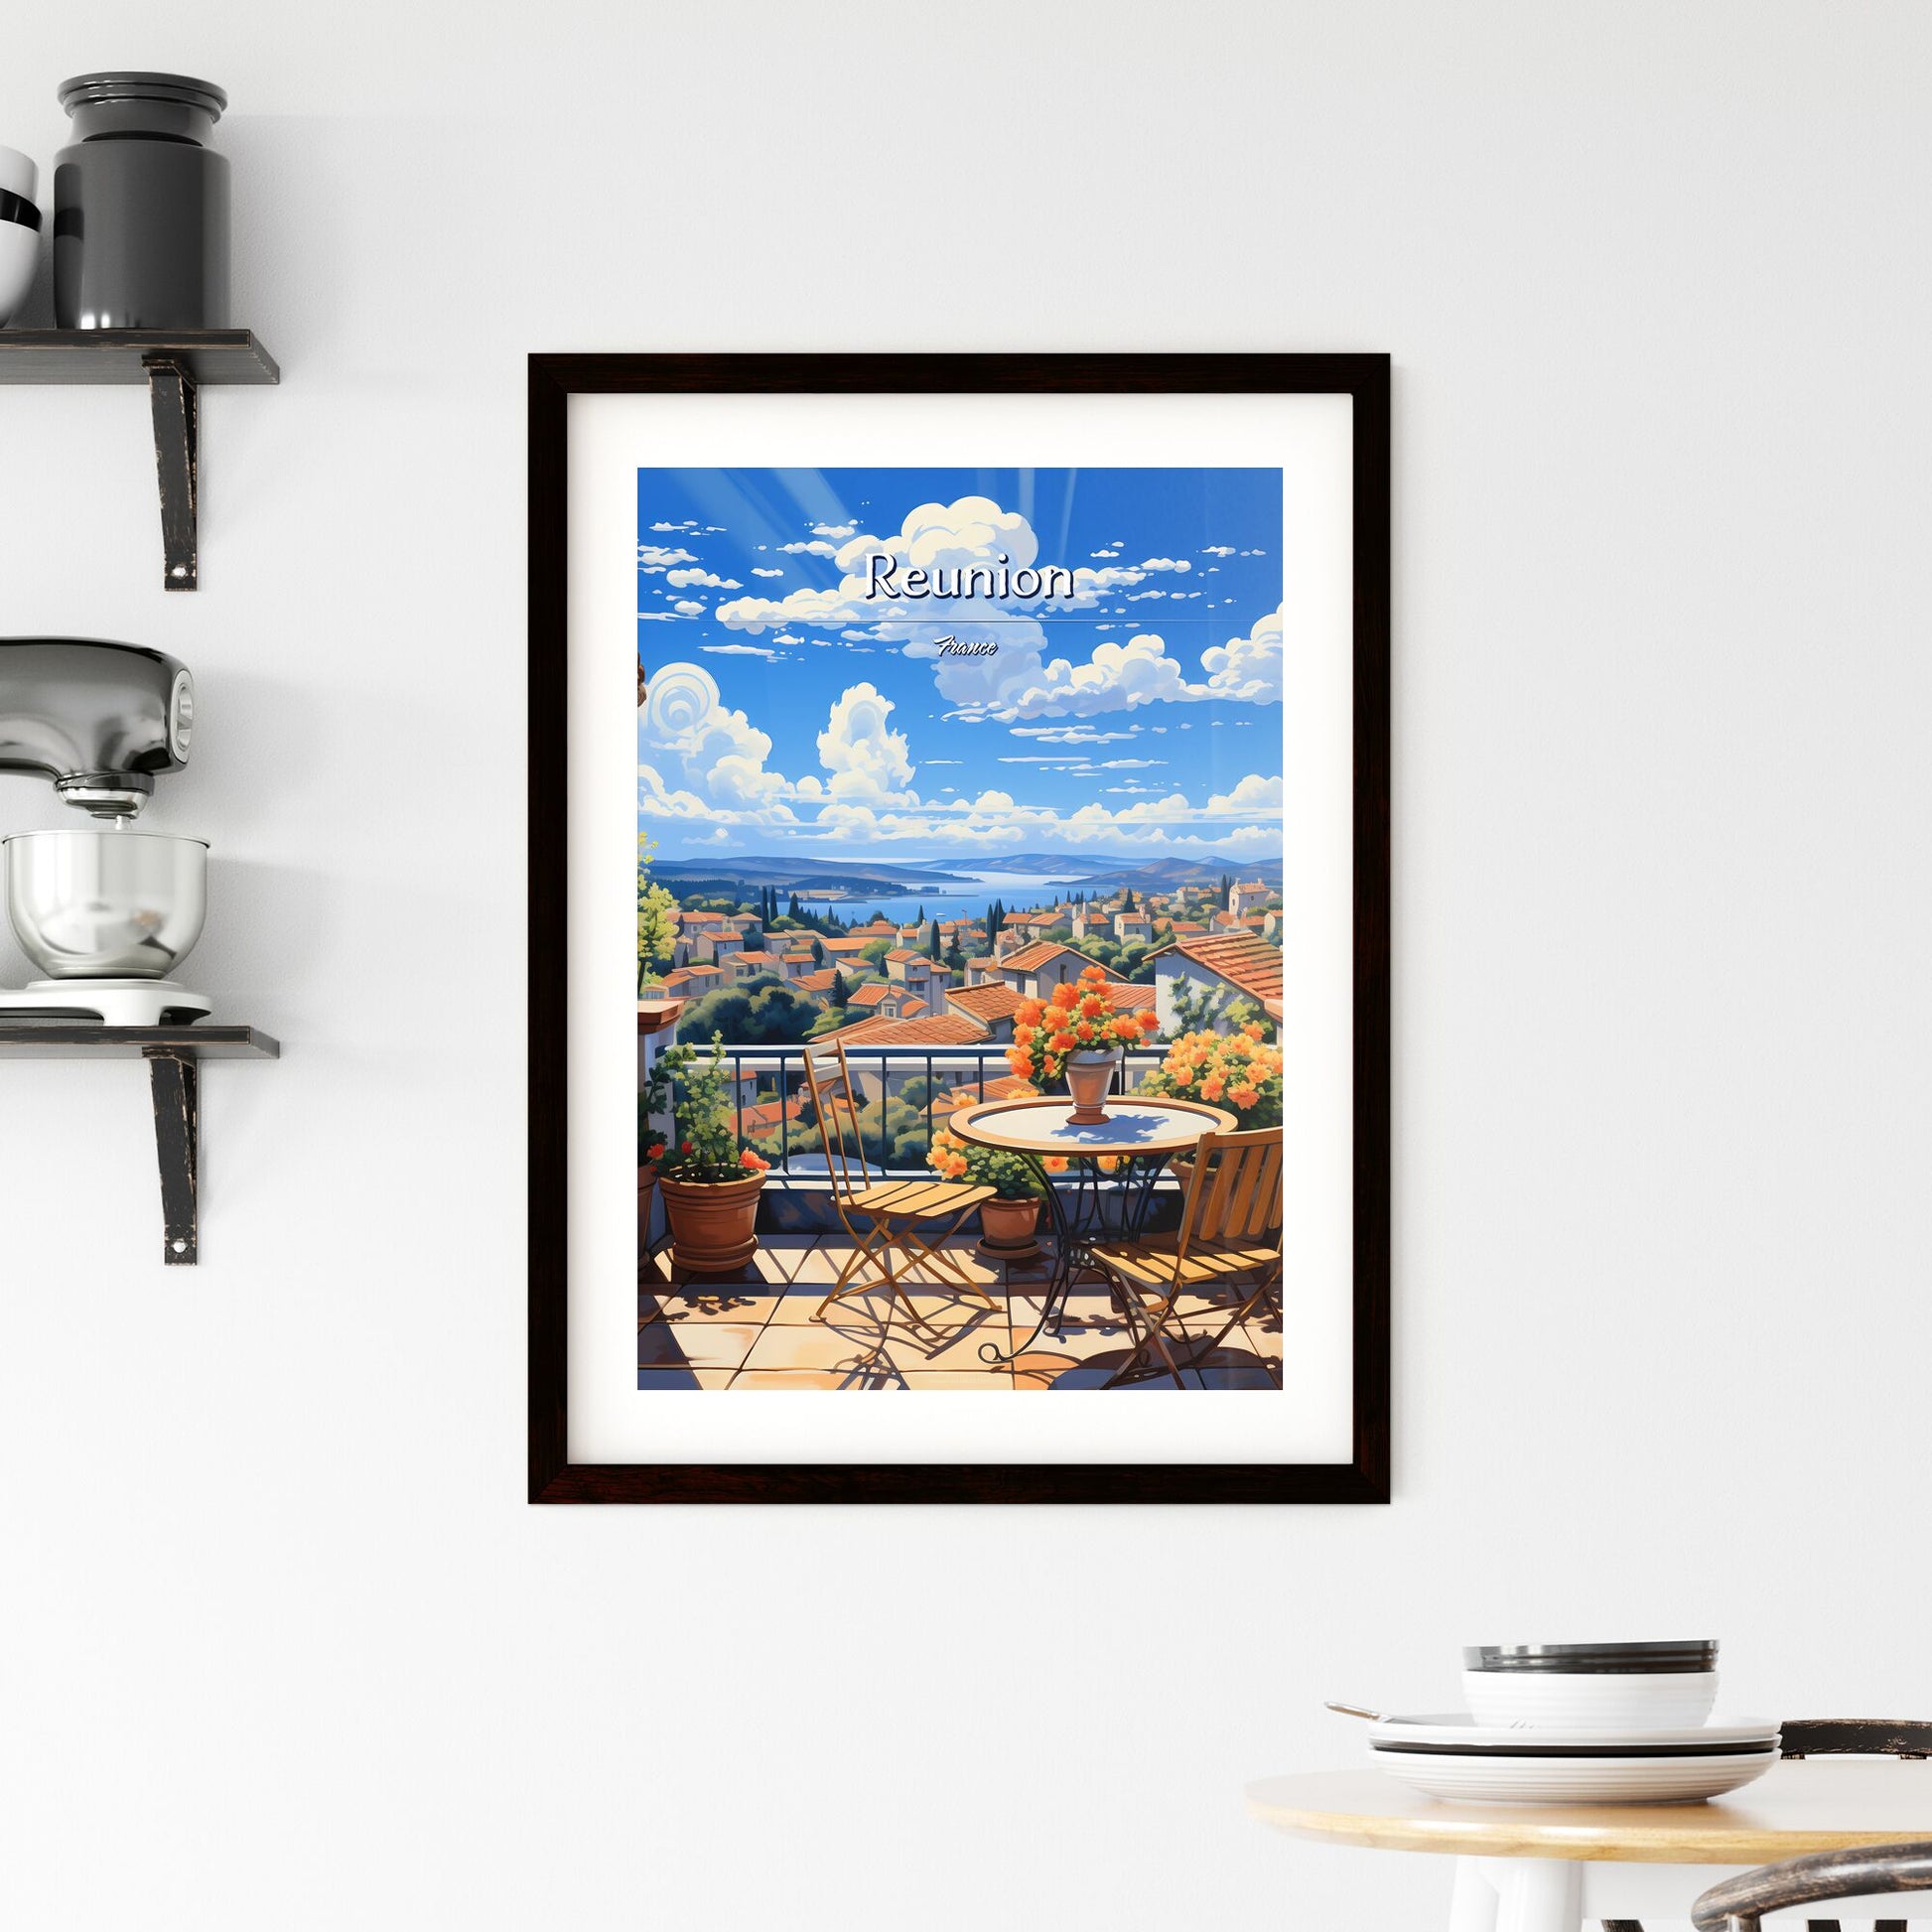 On the roofs of Reunion, France - Art print of a wooden table in front of a kitchen Default Title